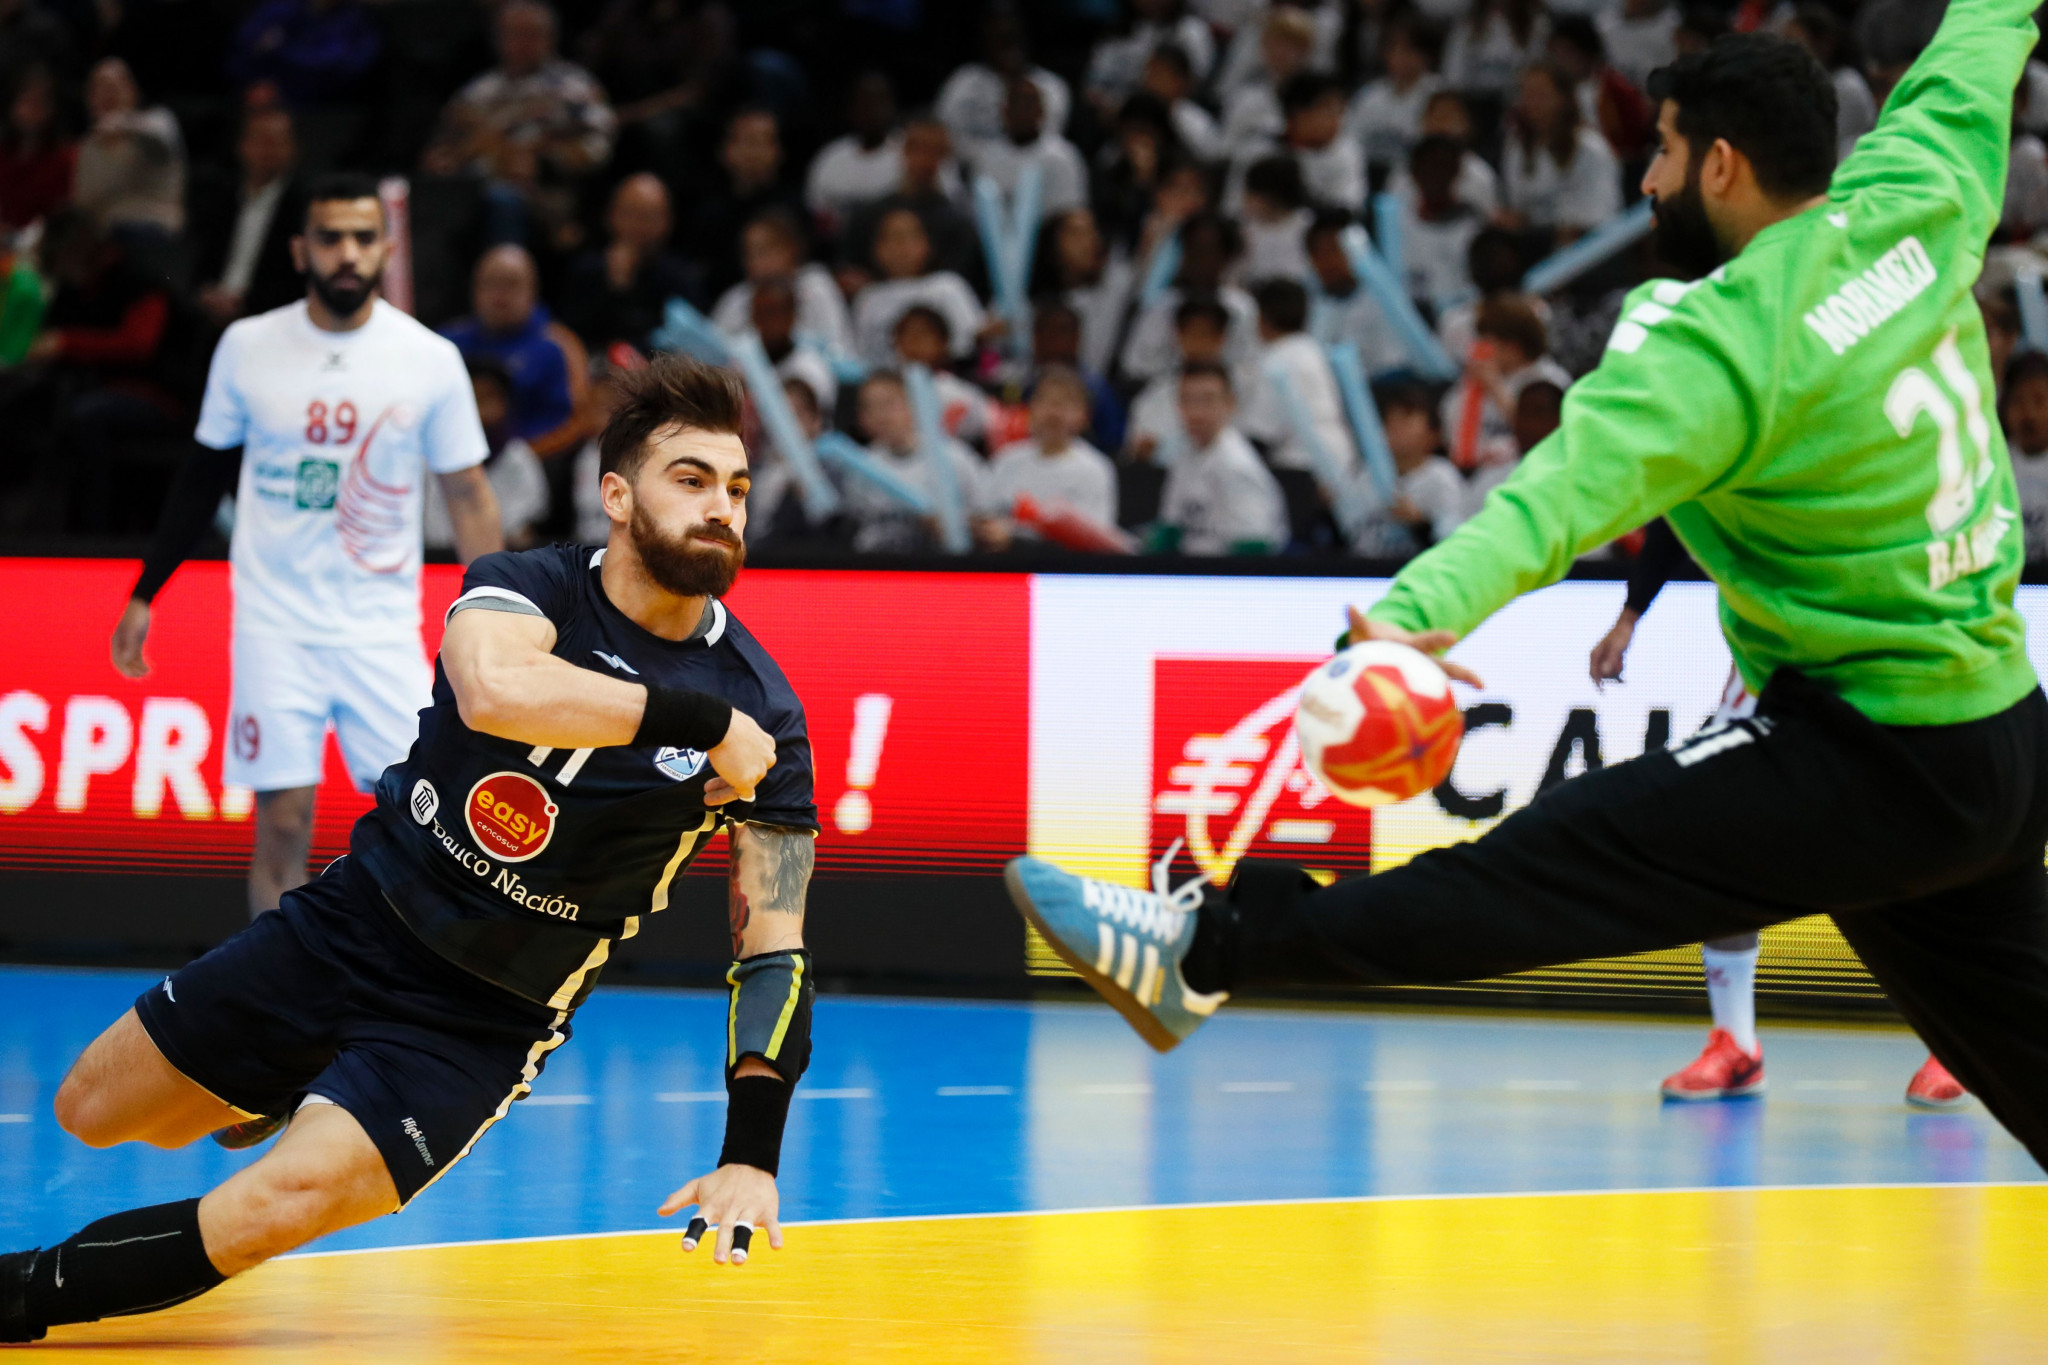 Argentina beat Chile to top spot in Group A at Pan American Men's Handball Championship